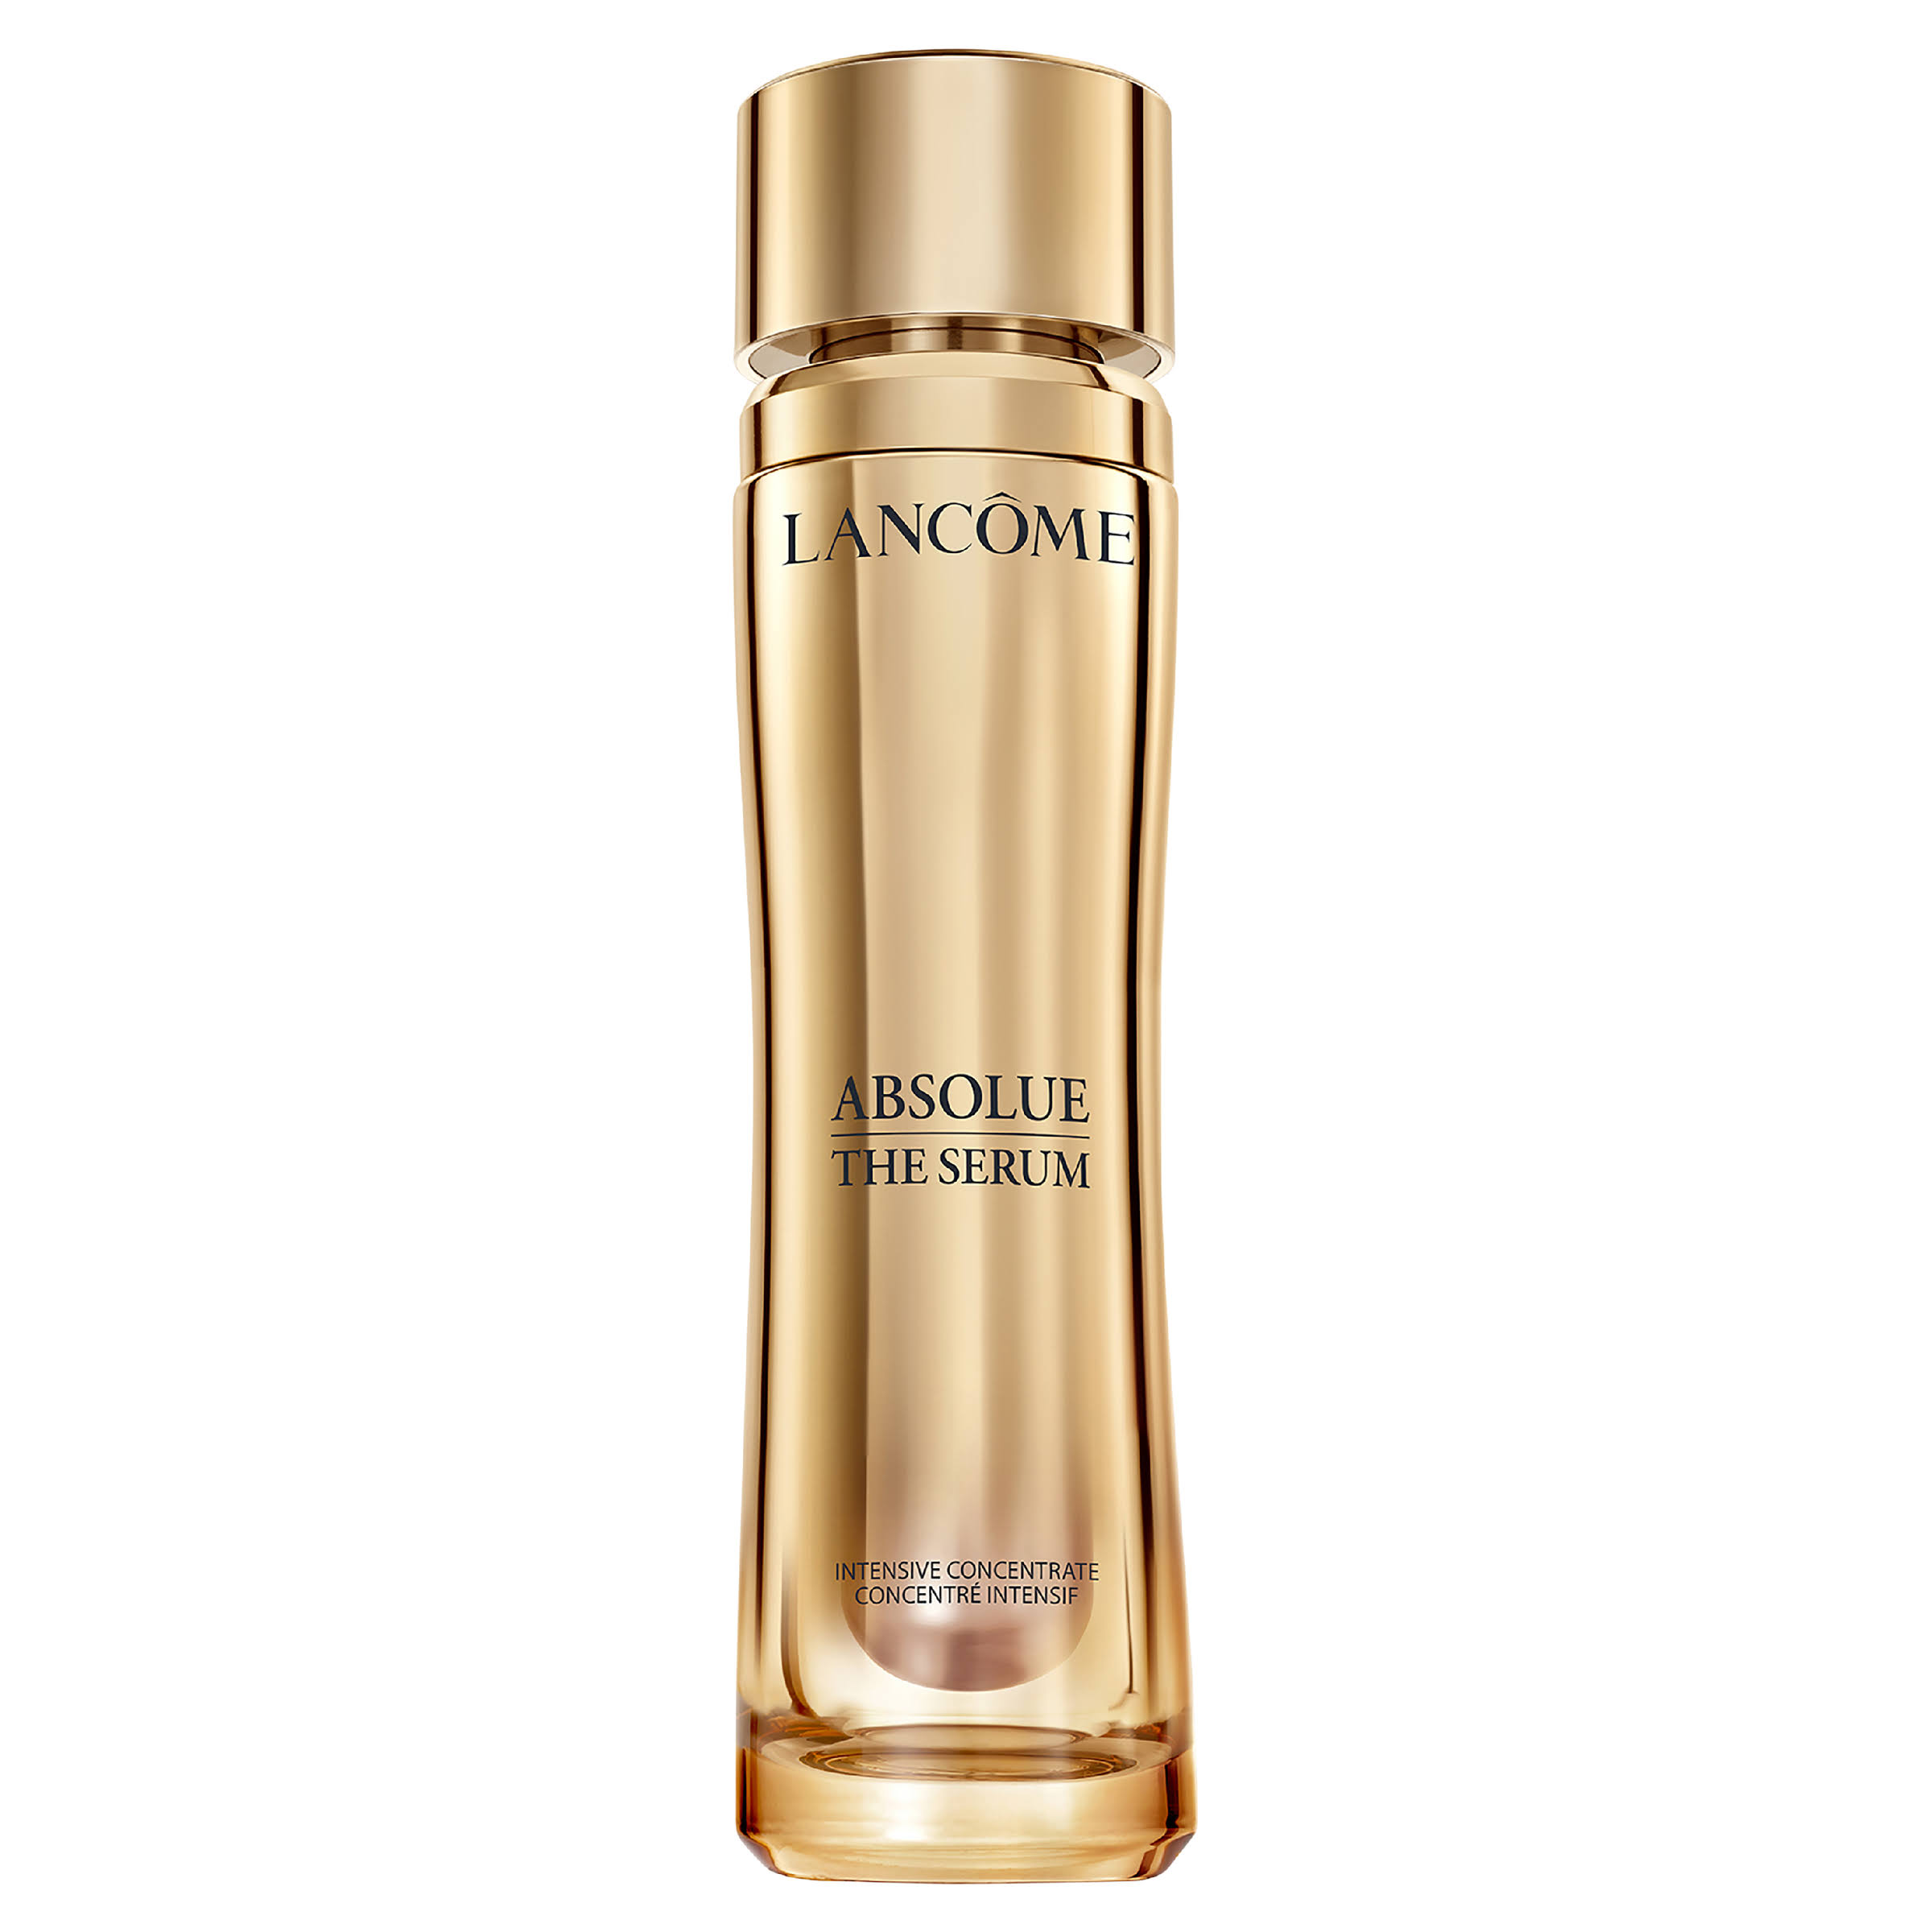 Lancome Absolue The Serum - Intensive Concentrate 30ml